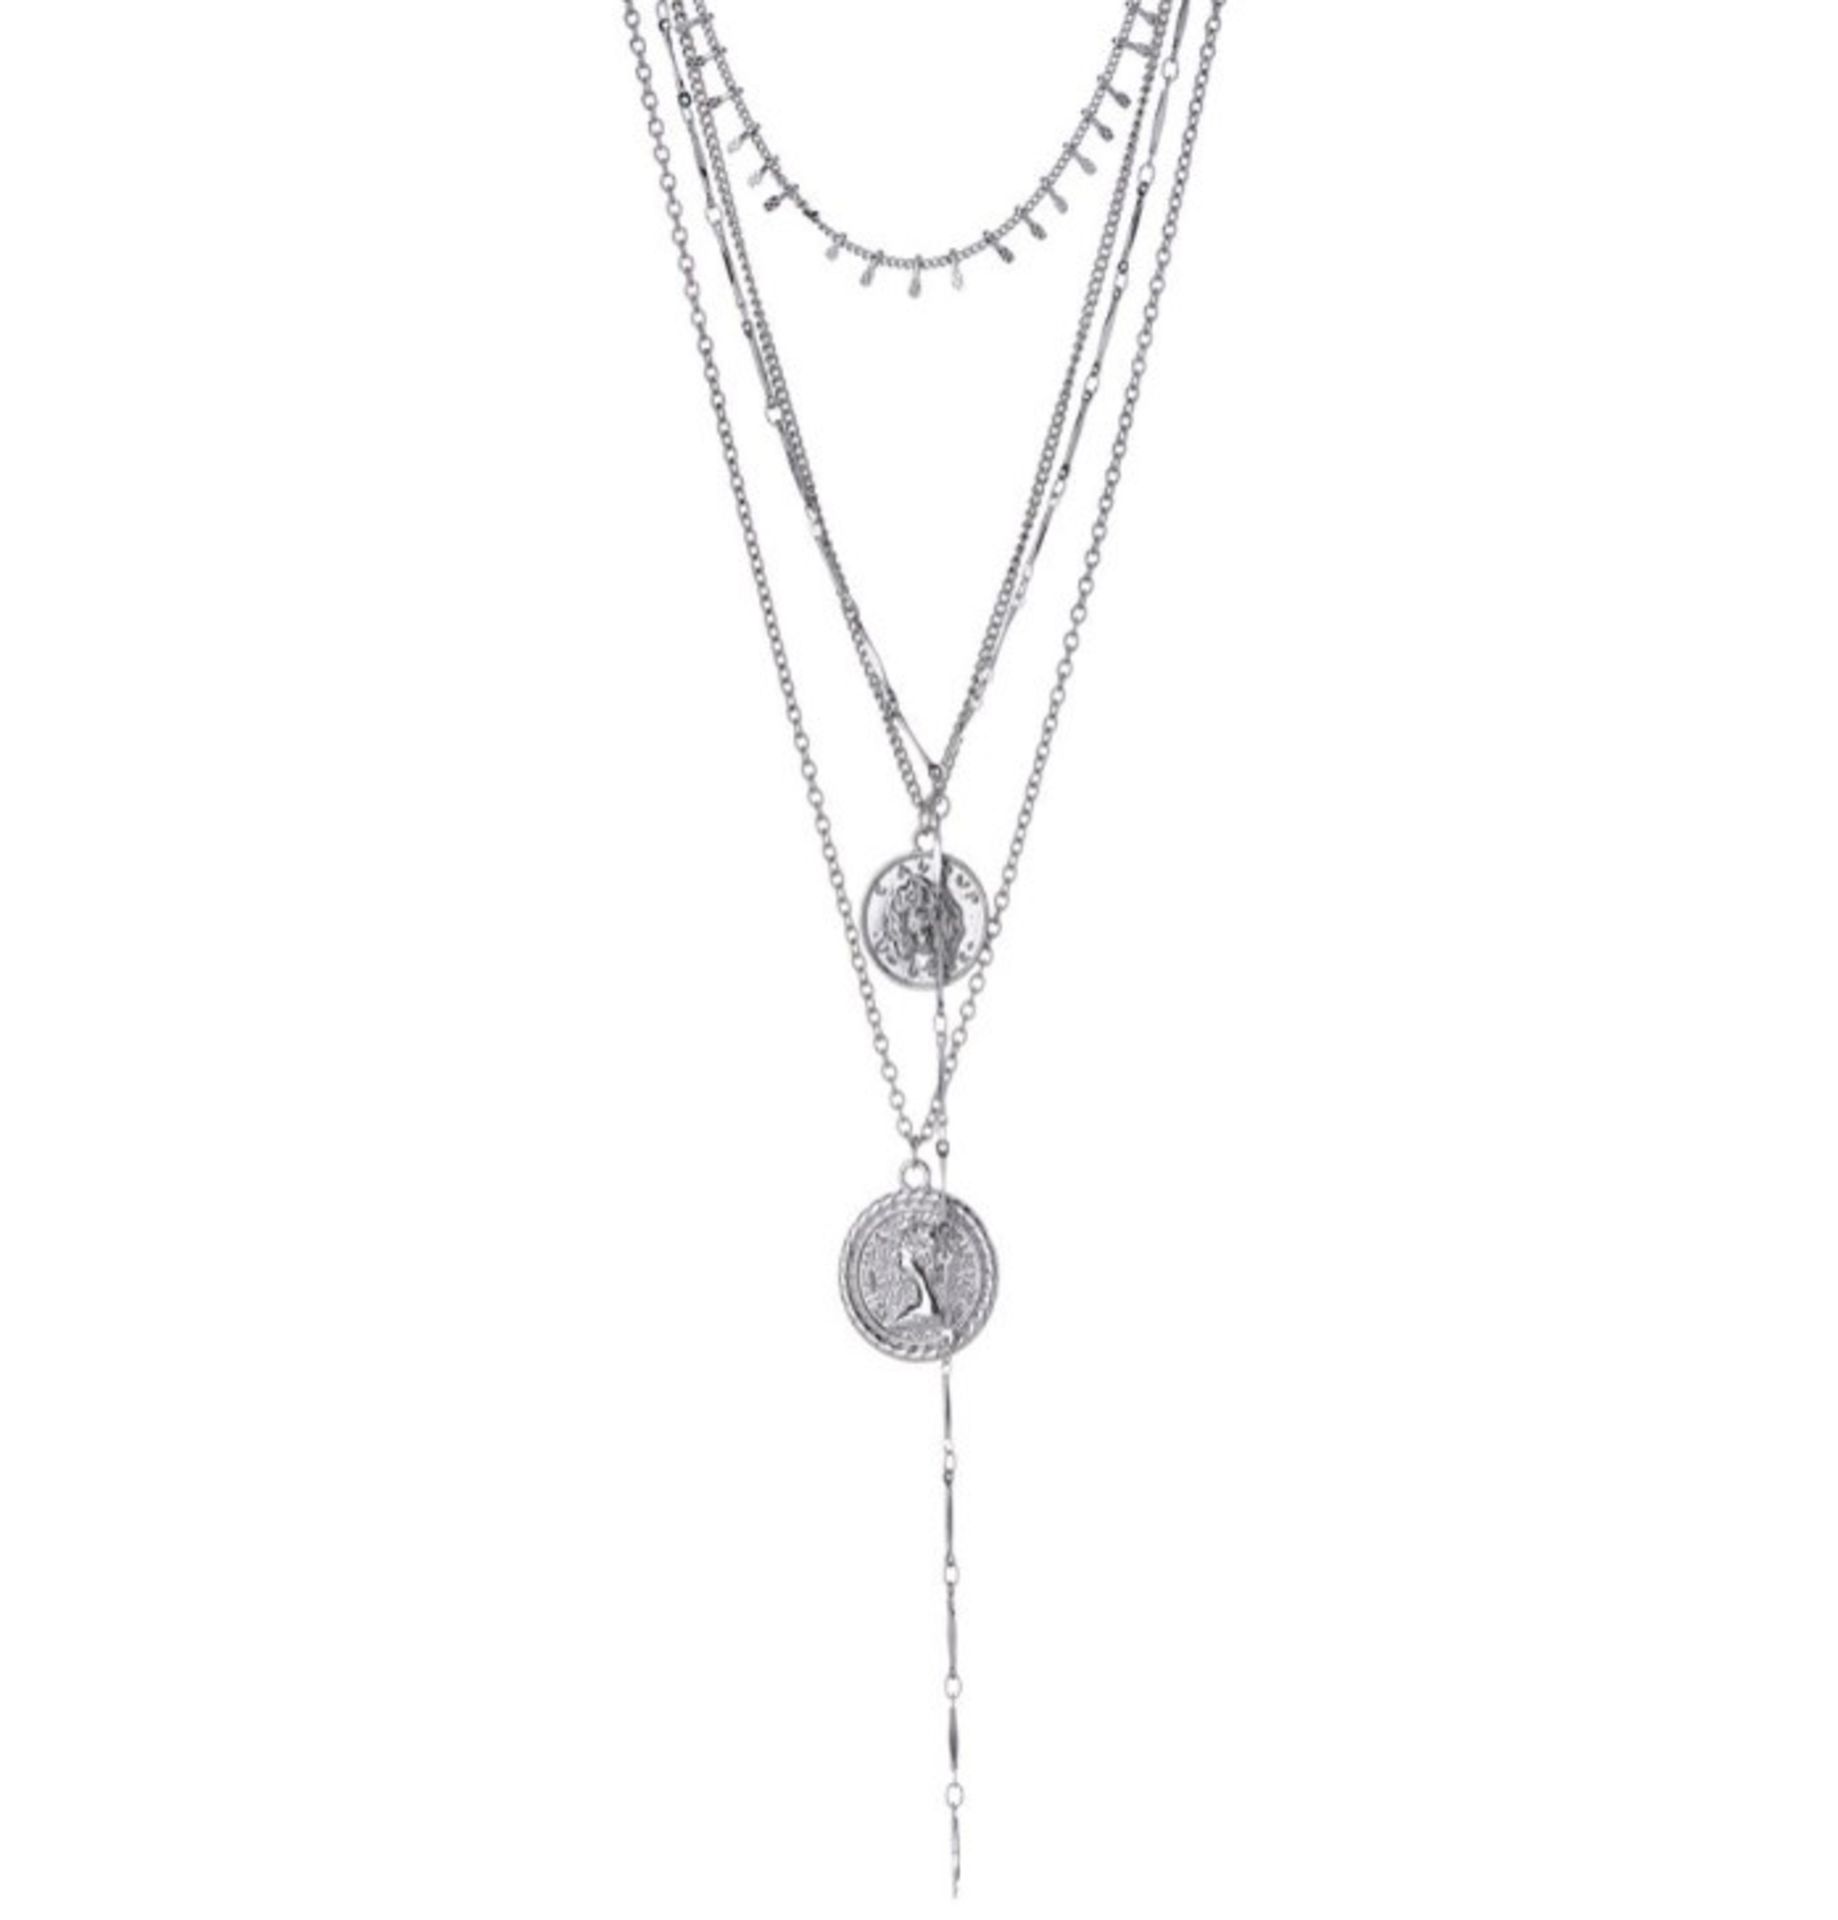 30 x Brand New Prettylittlething Silver Coin Necklace total RRP £240 (£7.99 Each)